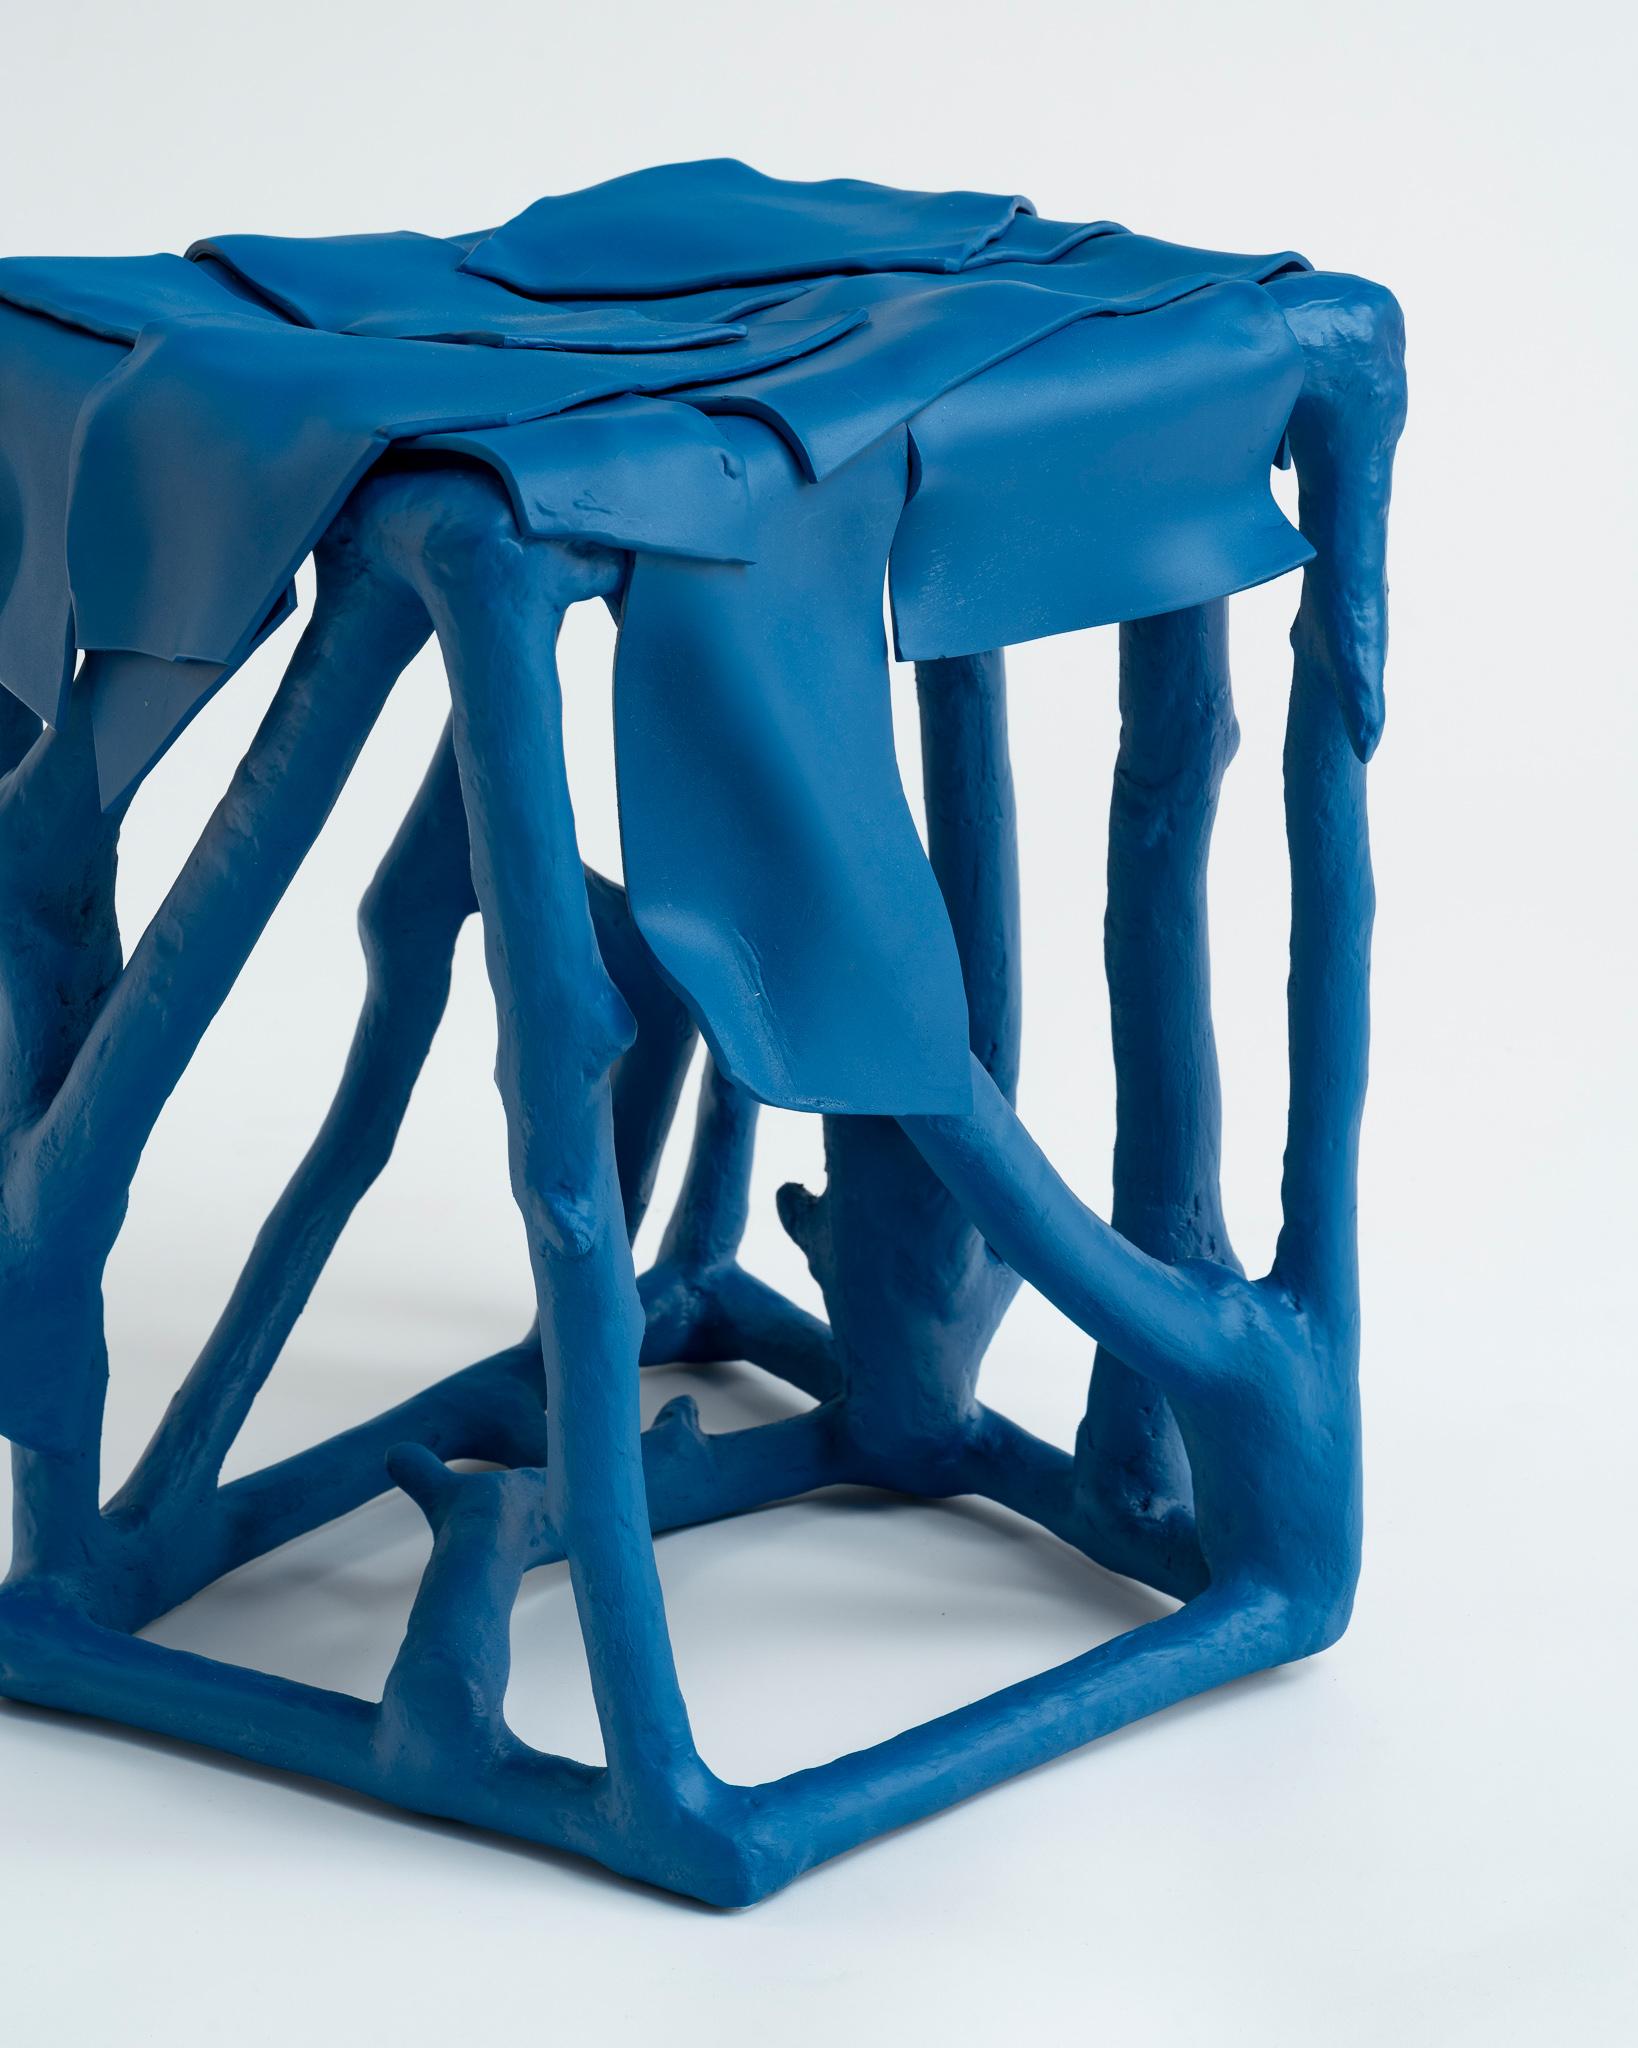 Contemporary Eclectic, One-Off Decorative Accent Table or Stool in Vivid Azure Blue For Sale